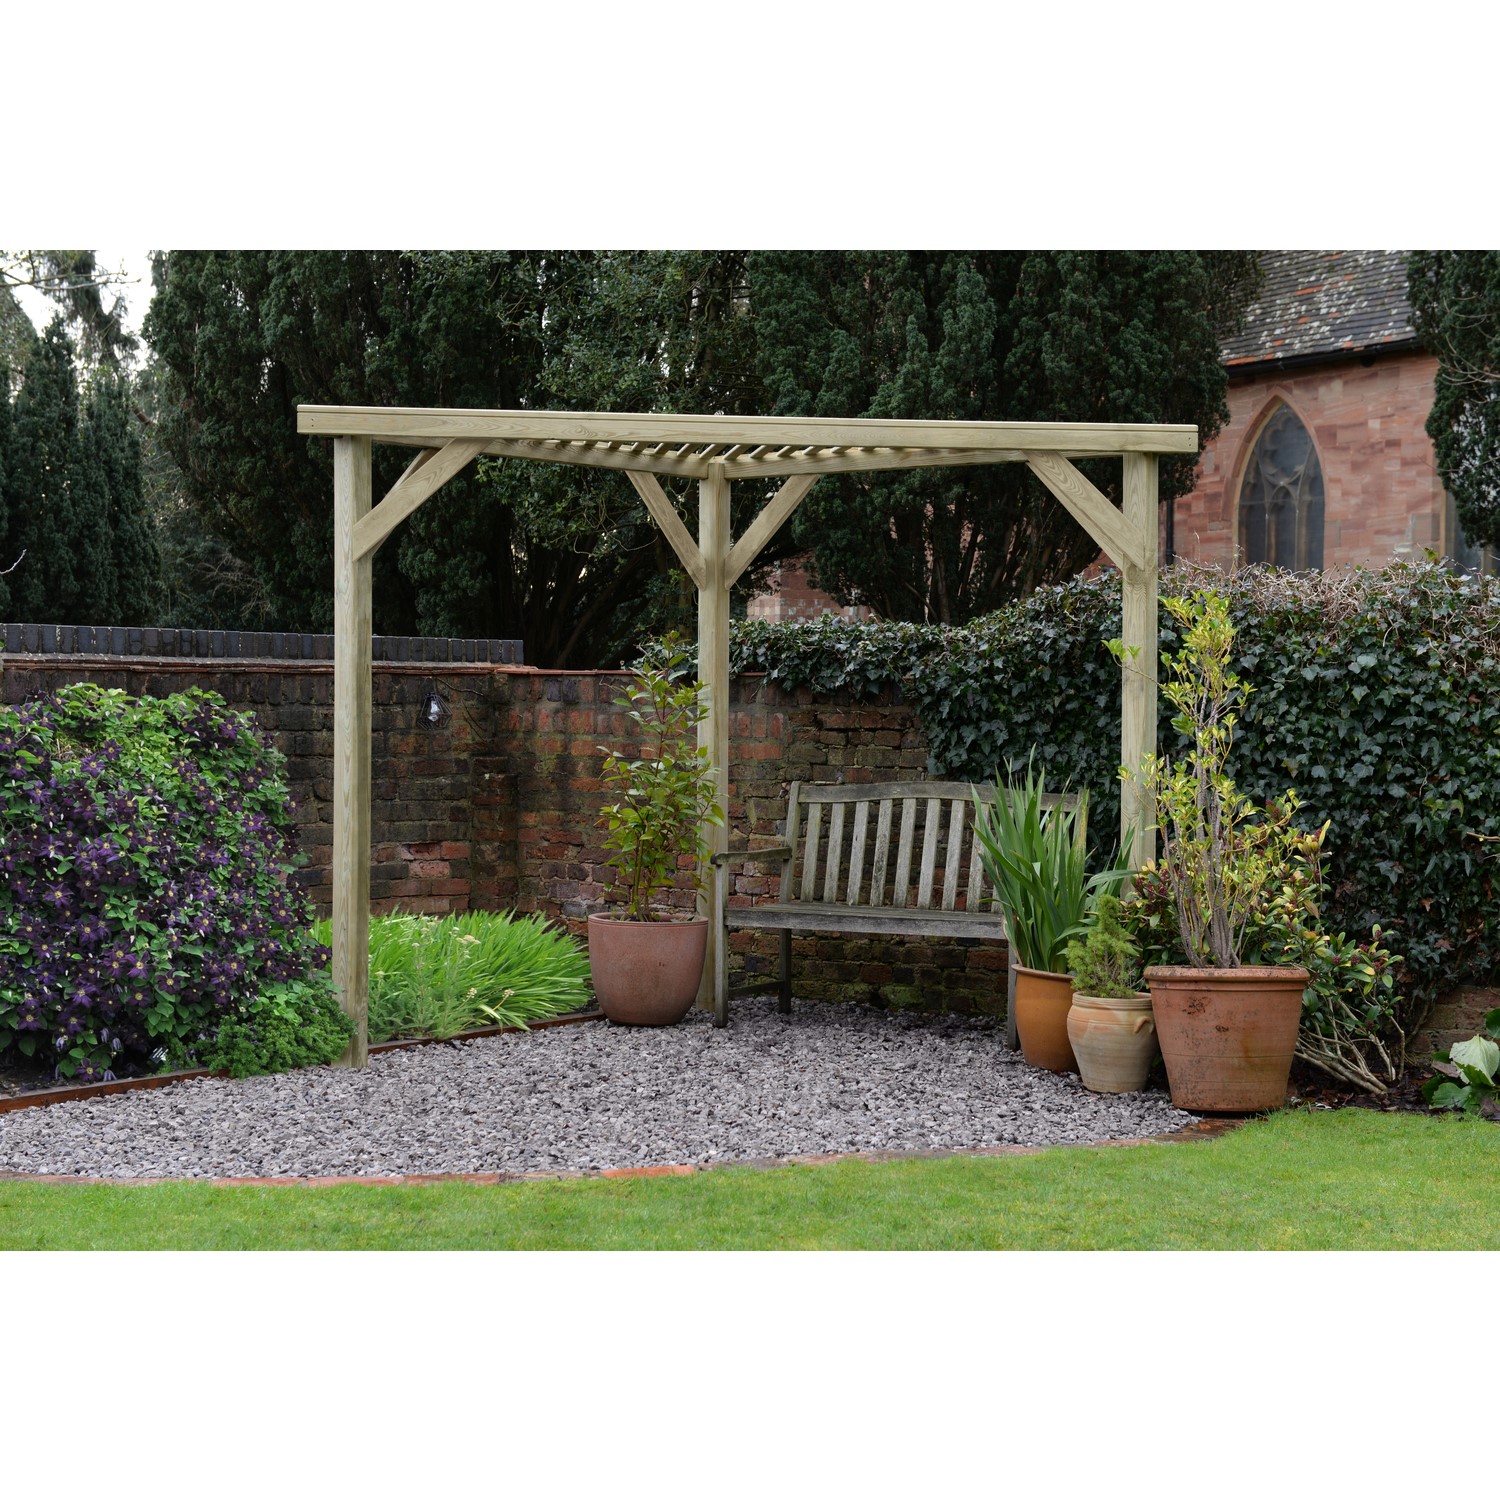 Read more about Forest slatted corner pergola